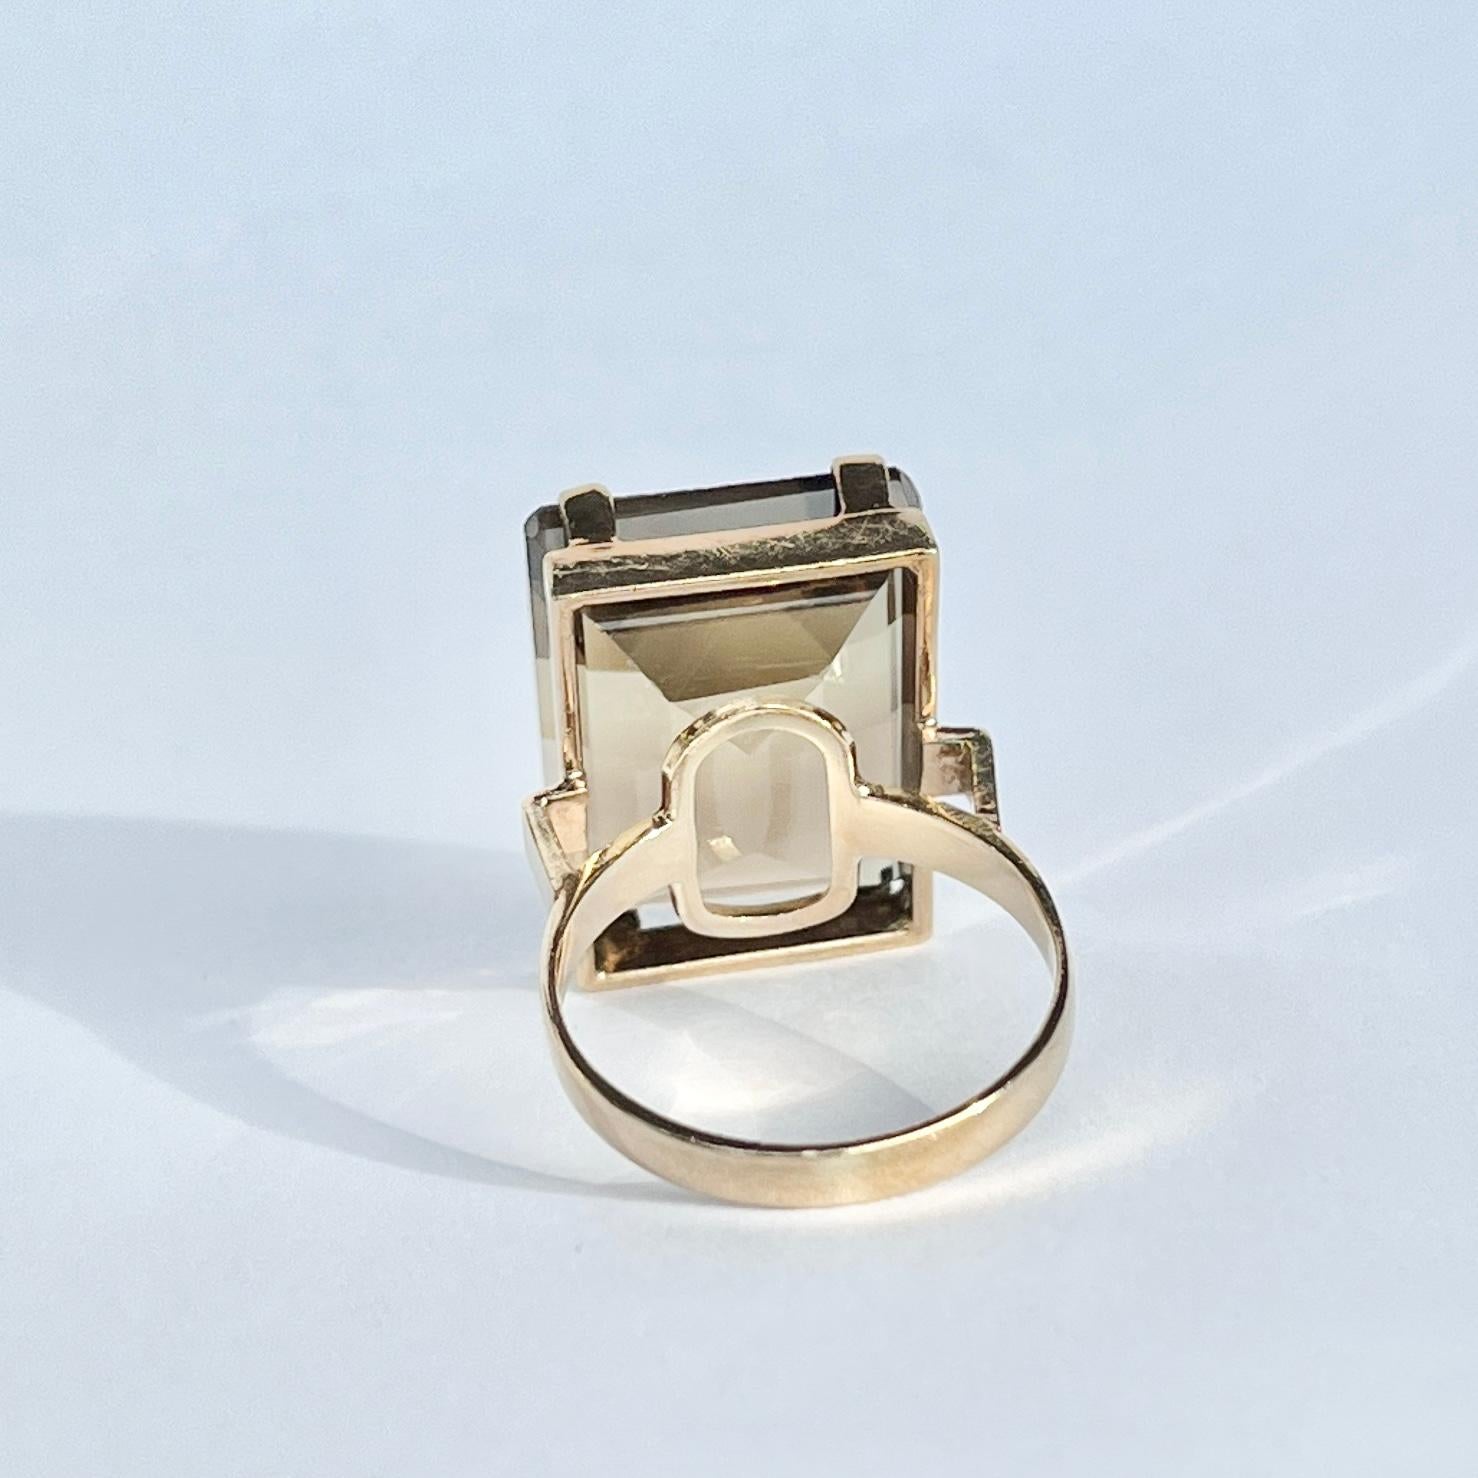 Vintage Smokey Quartz and 9 Carat Gold Cocktail Ring In Good Condition For Sale In Chipping Campden, GB